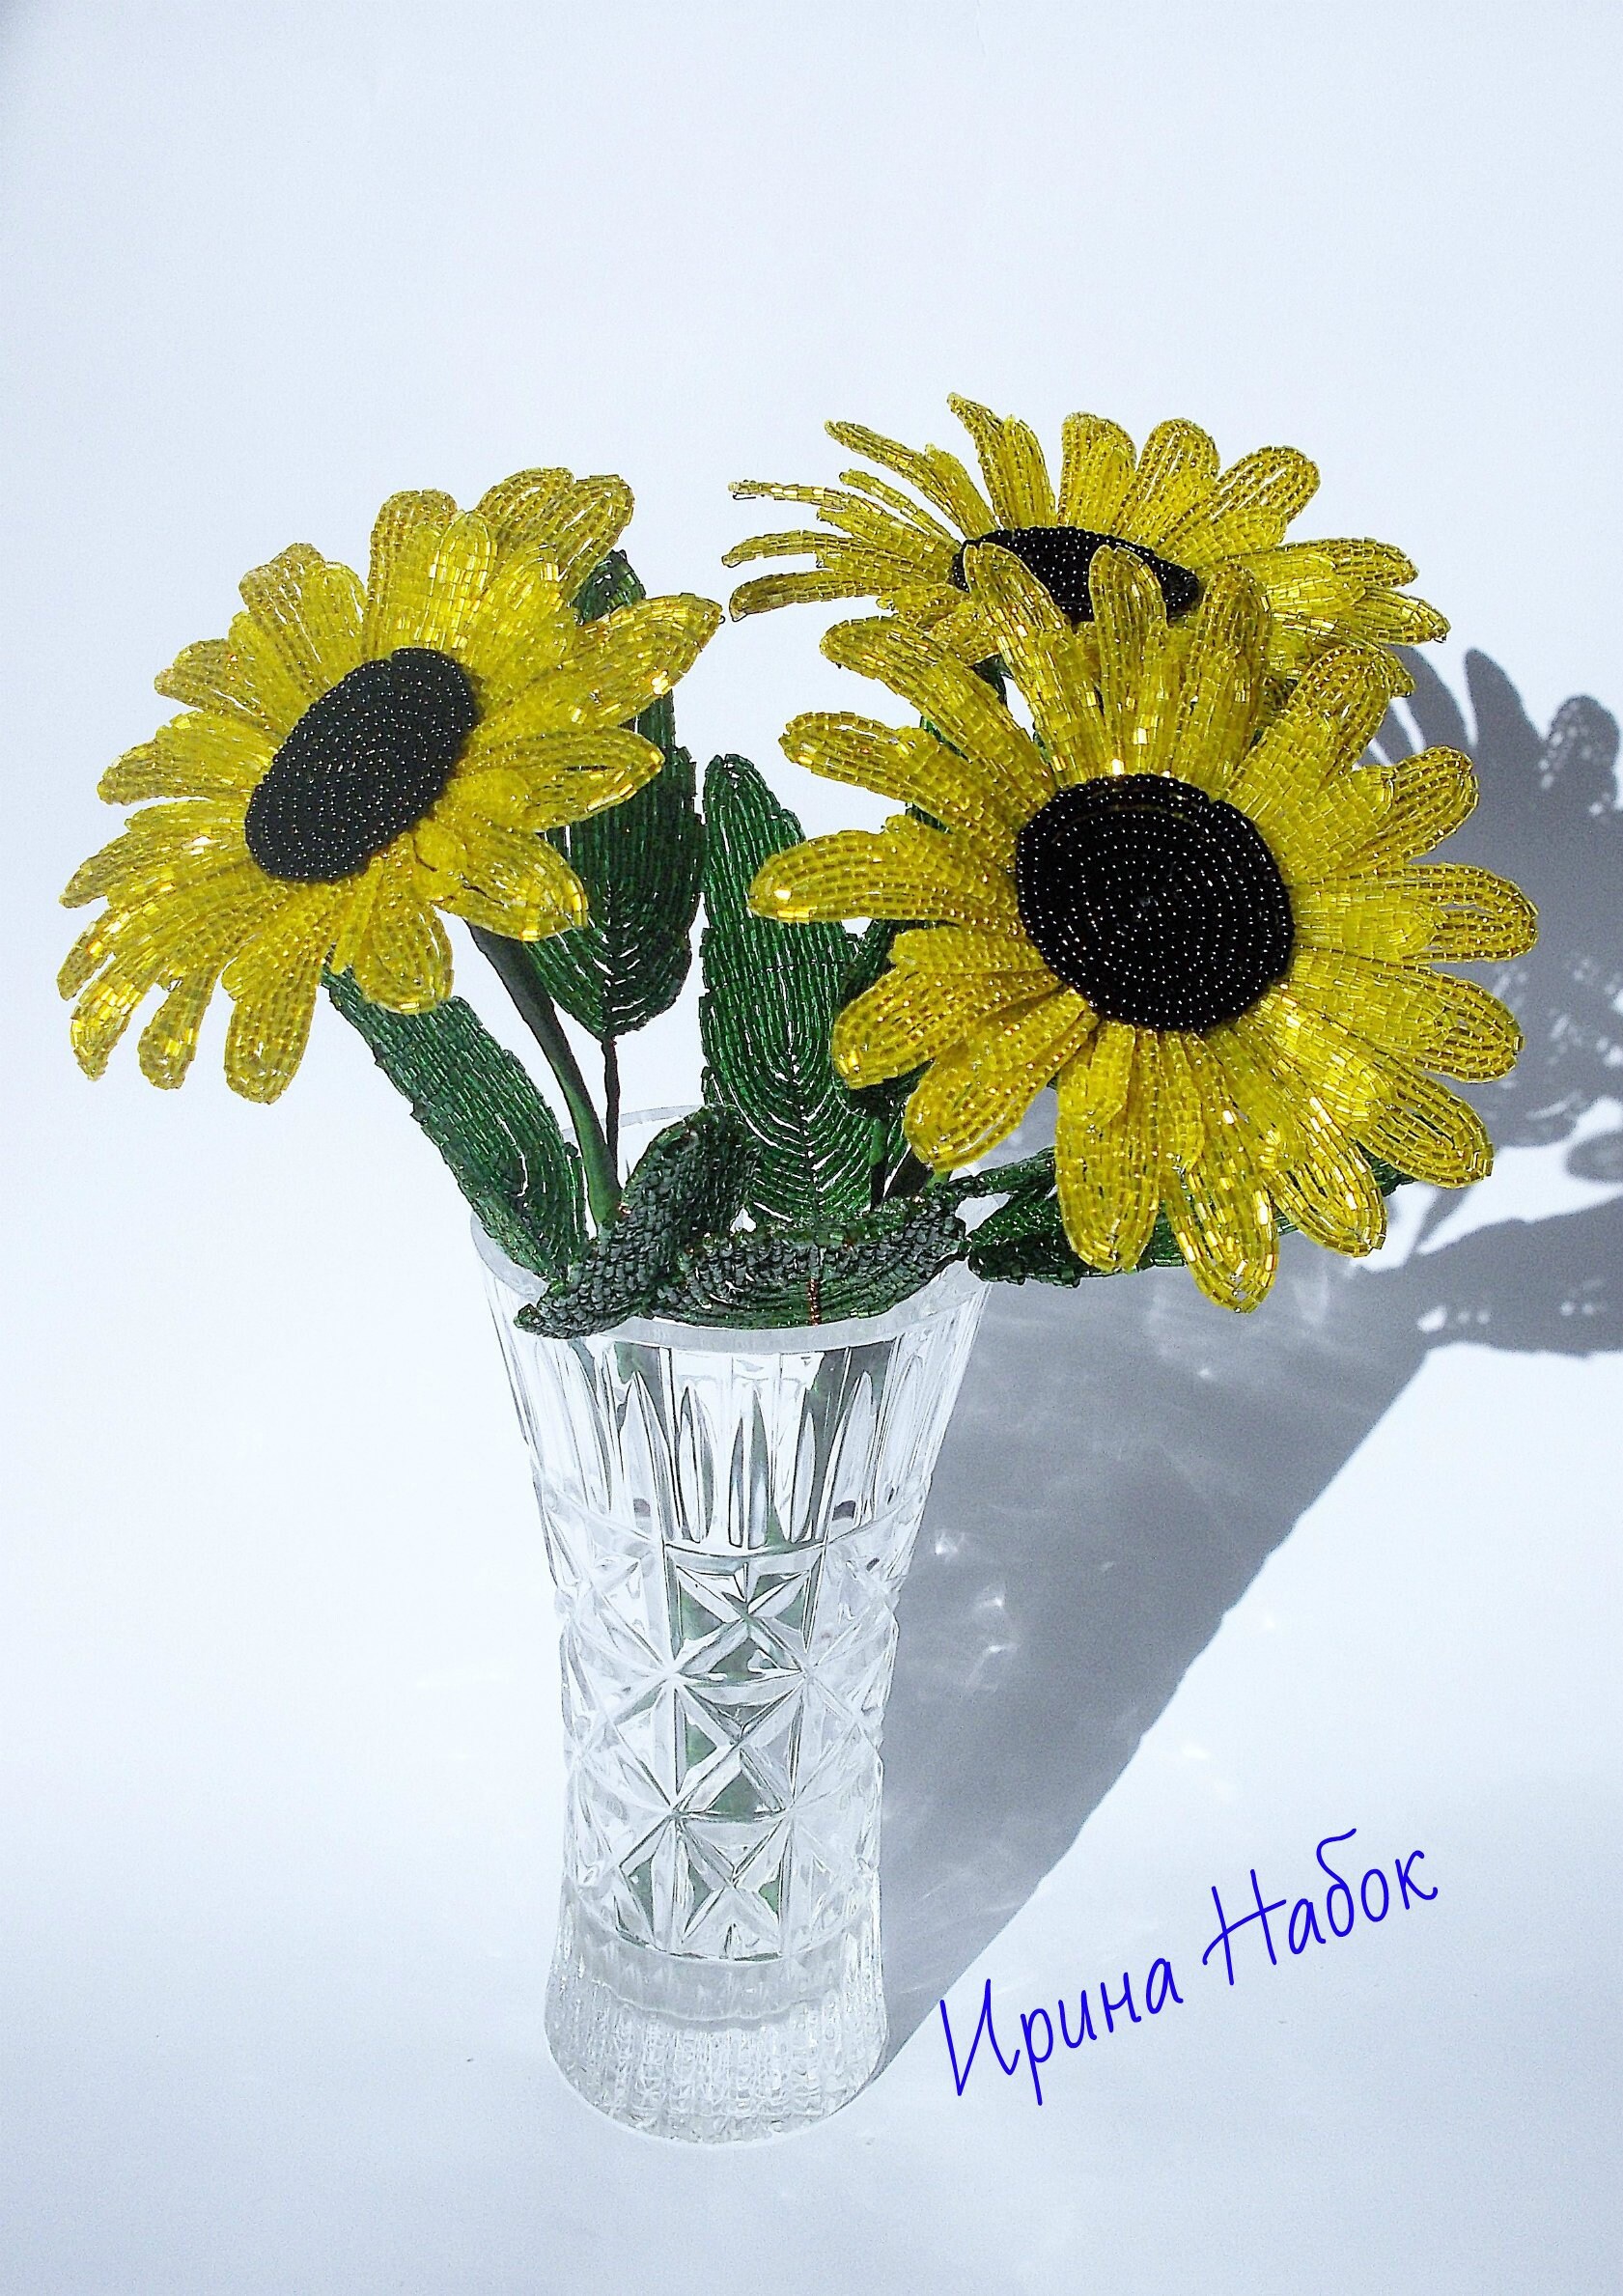 Beaded Flowers Sunflower From Beads Flowers for a Decor - Etsy